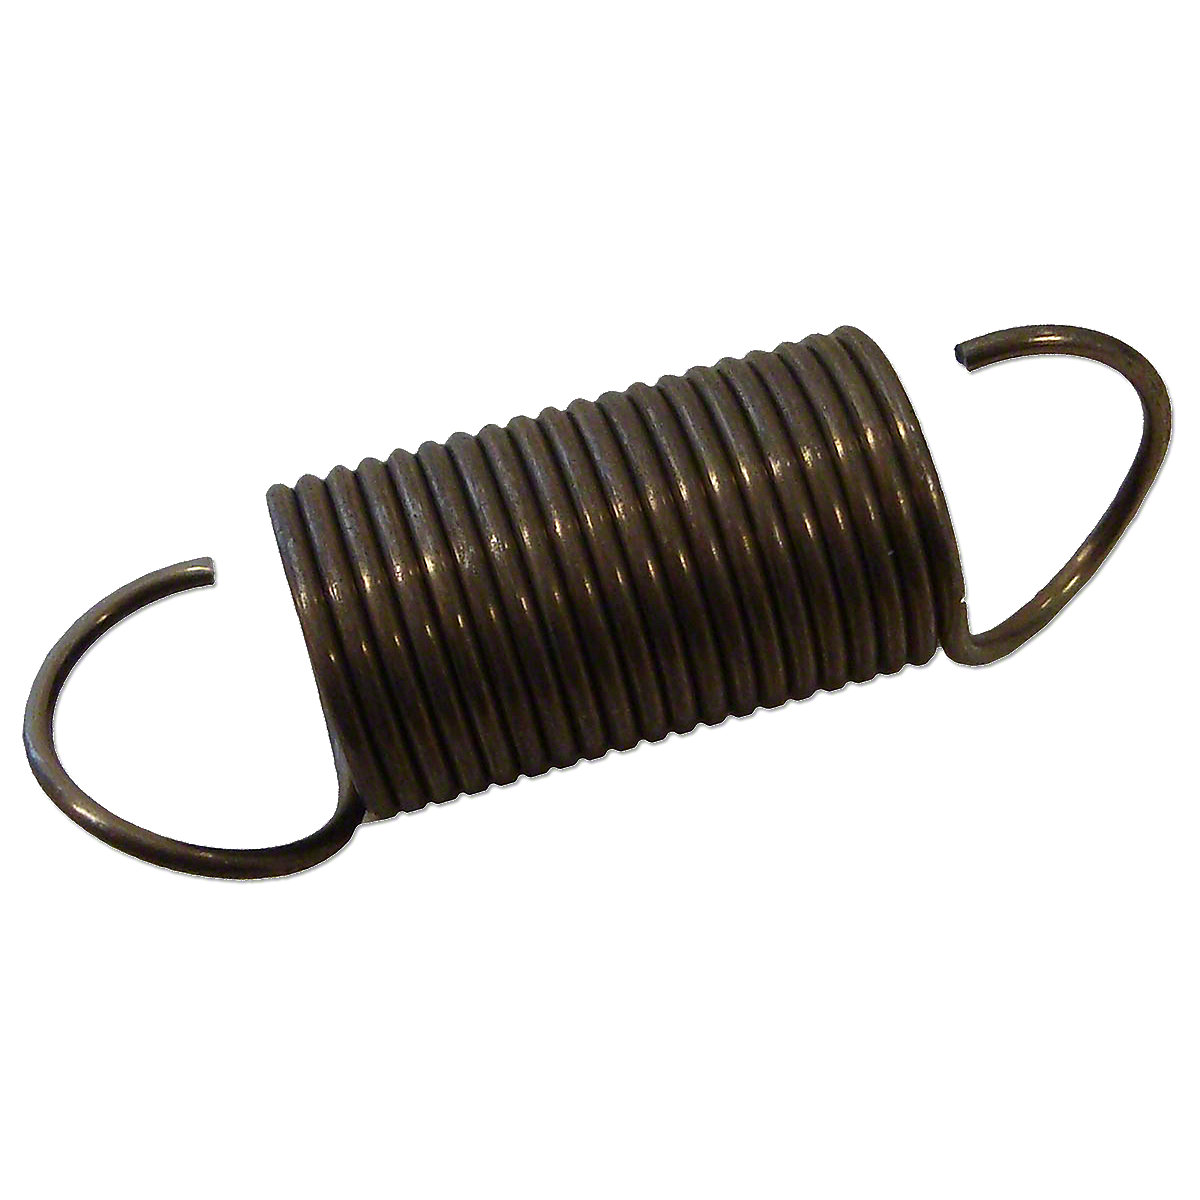 Governor Control Rod Spring For Allis Chalmers: G.